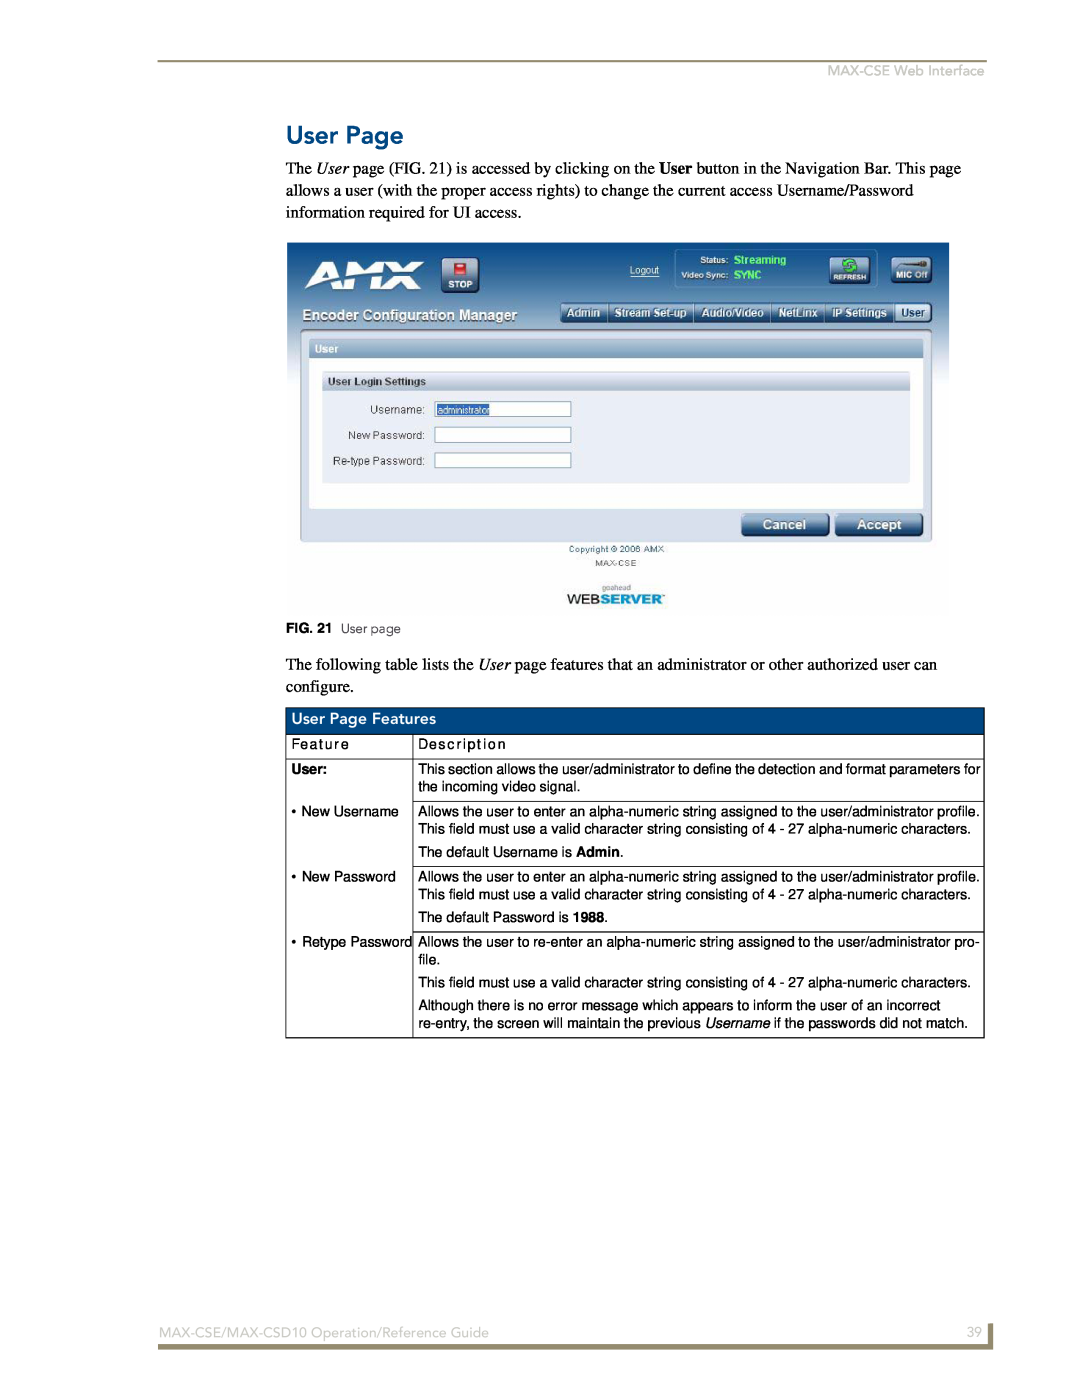 AMX MAX-CSD10, MAX-CSE manual User Page Features 